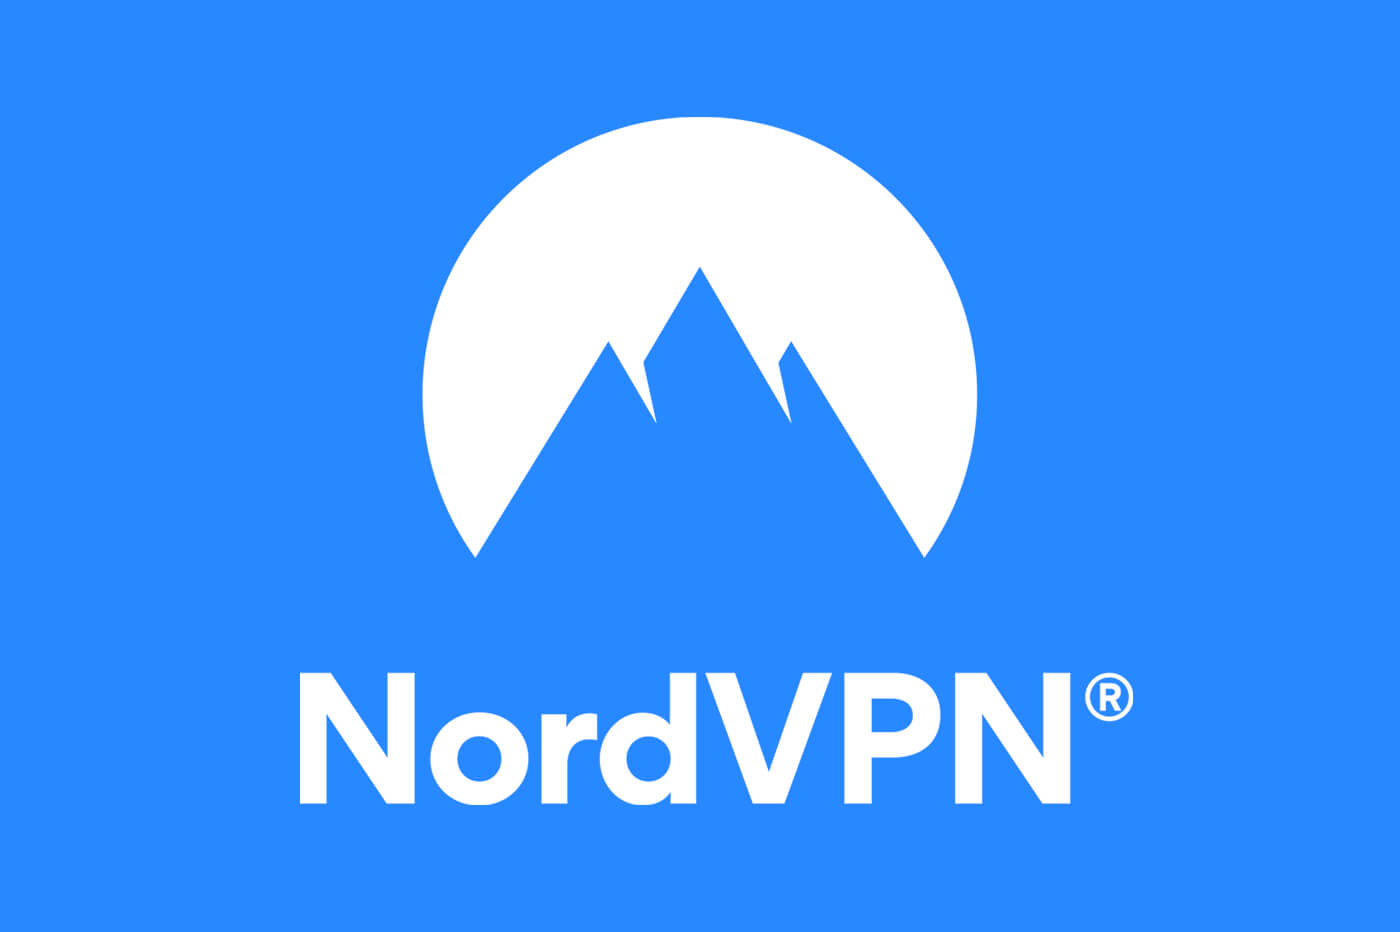 NordVPN company <a href='http://domains.termin-app-online.de/2023/03/13/how-to-use-domains-plugin-to-create-a-custom-domain-for-your-wordpress-site/' target='_blank'>name</a> and logo, blue mountain peaks against a white circle on a blue background.”><figcaption id=